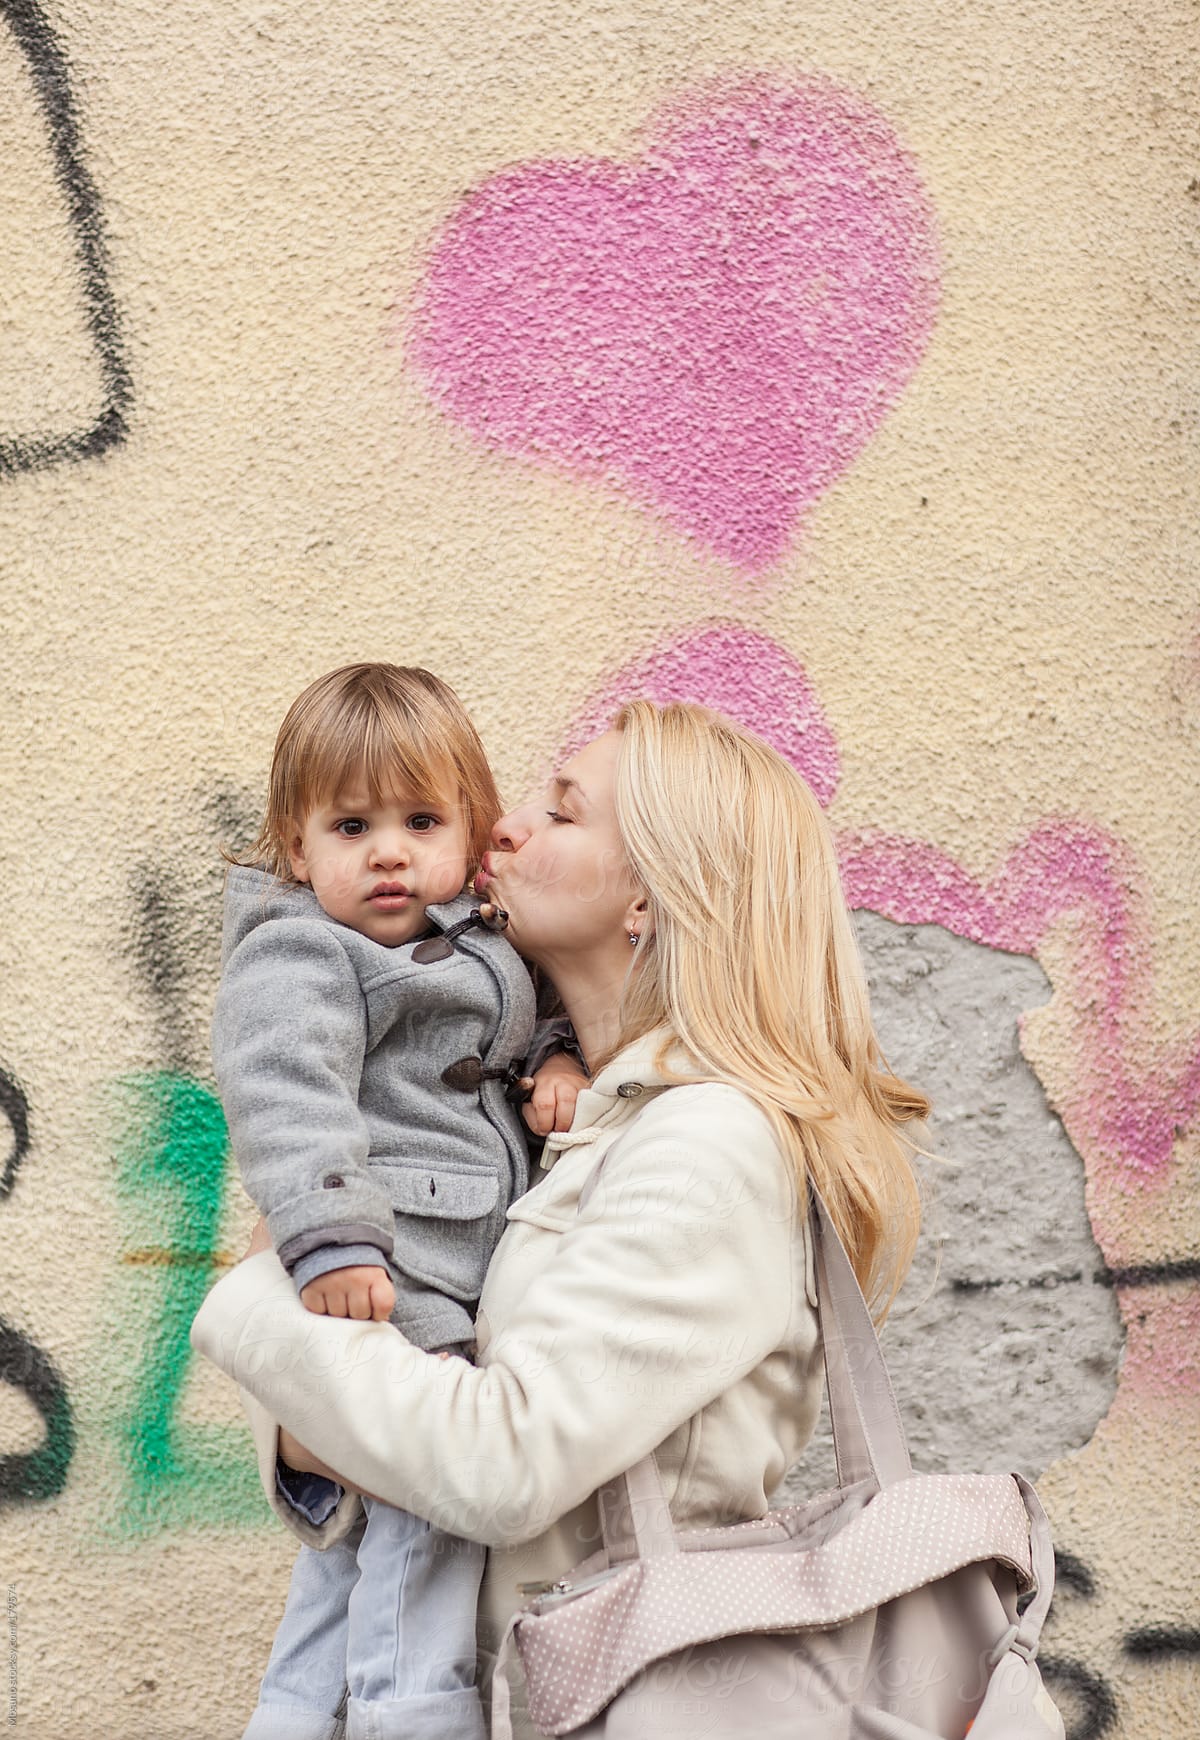 Mother Kissing Her Son By Stocksy Contributor Mosuno Stocksy 